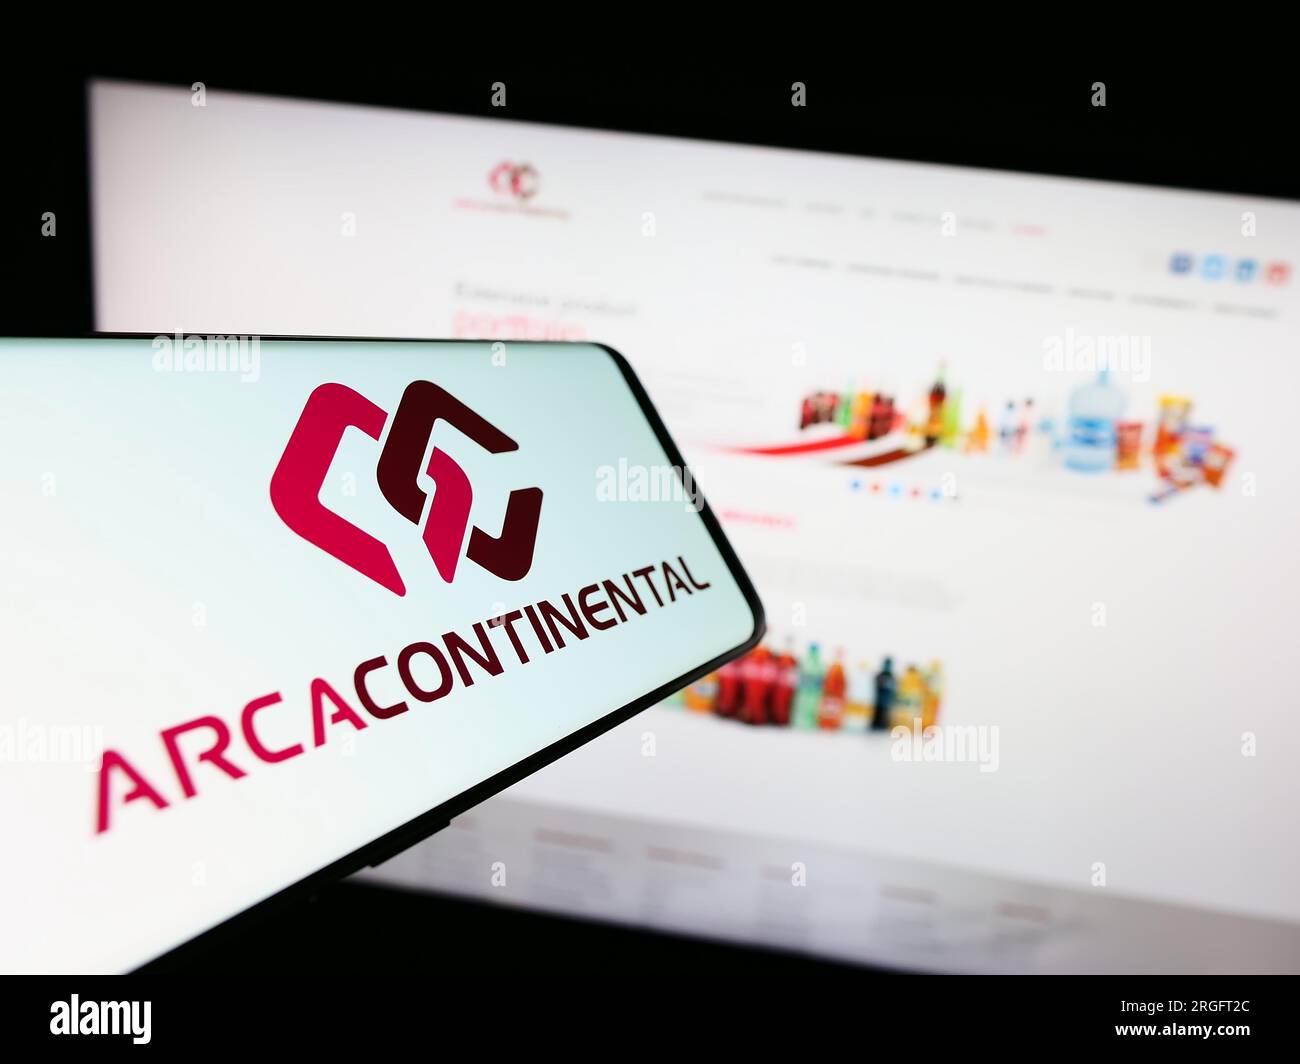 Smartphone with logo of Mexican company Arca Continental SAB de CV on screen in front of website. Focus on center-right of phone display. Stock Photo